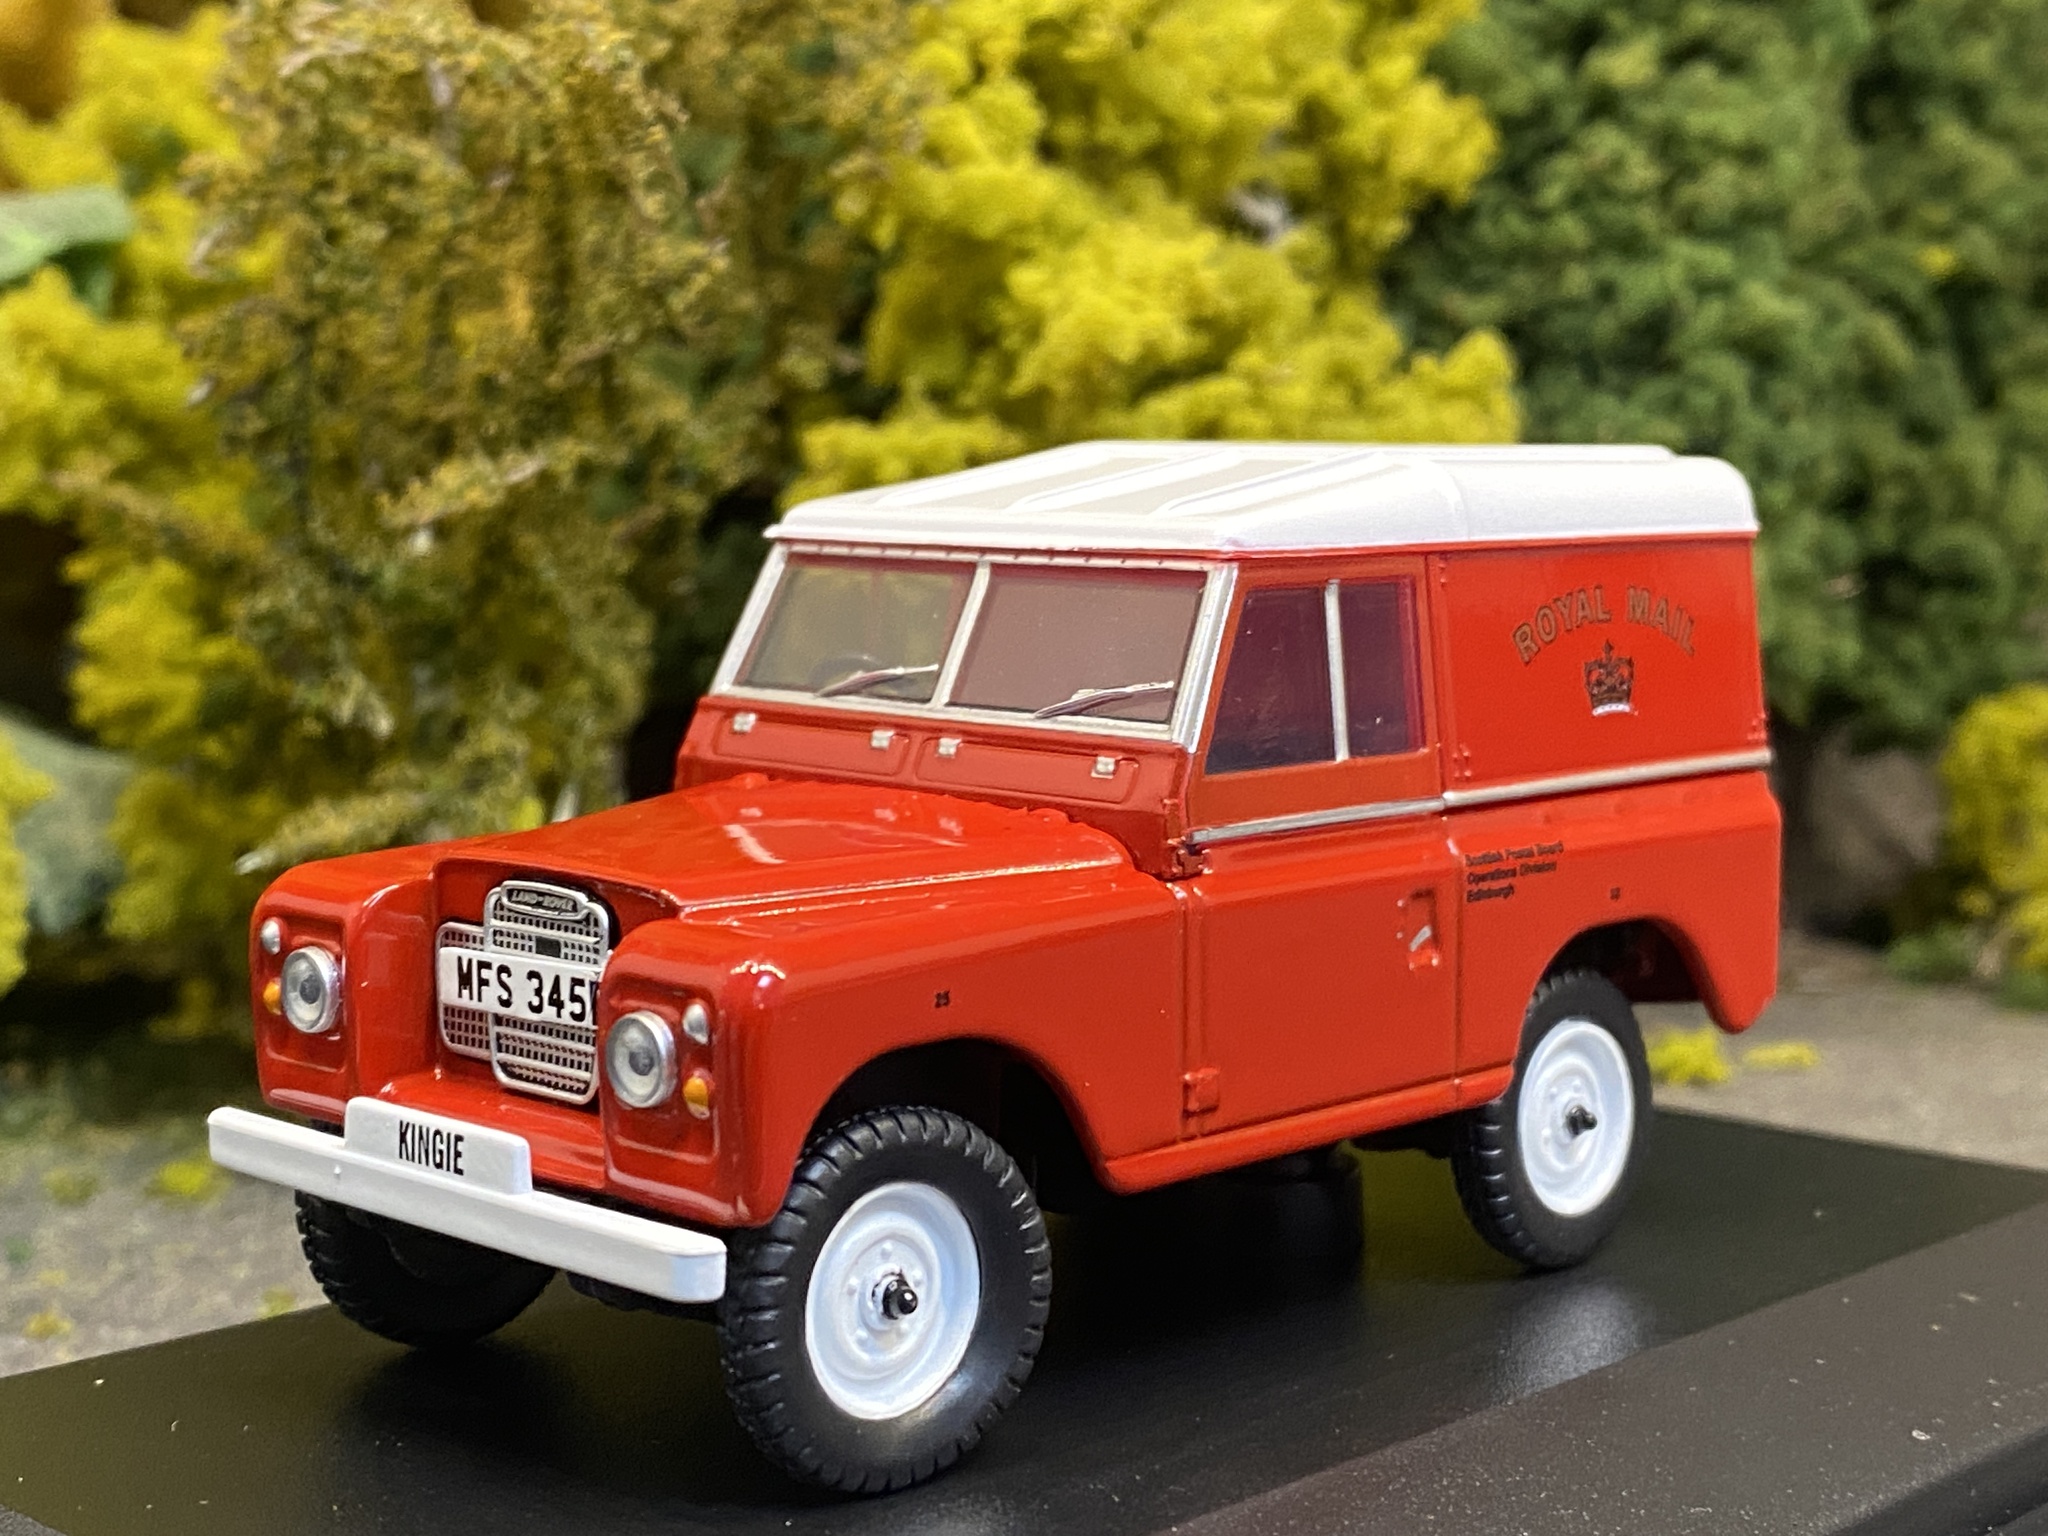 Skala 1/43 Land Rover Series III Royal Mail, Red, Rhd fr Oxford Commercials